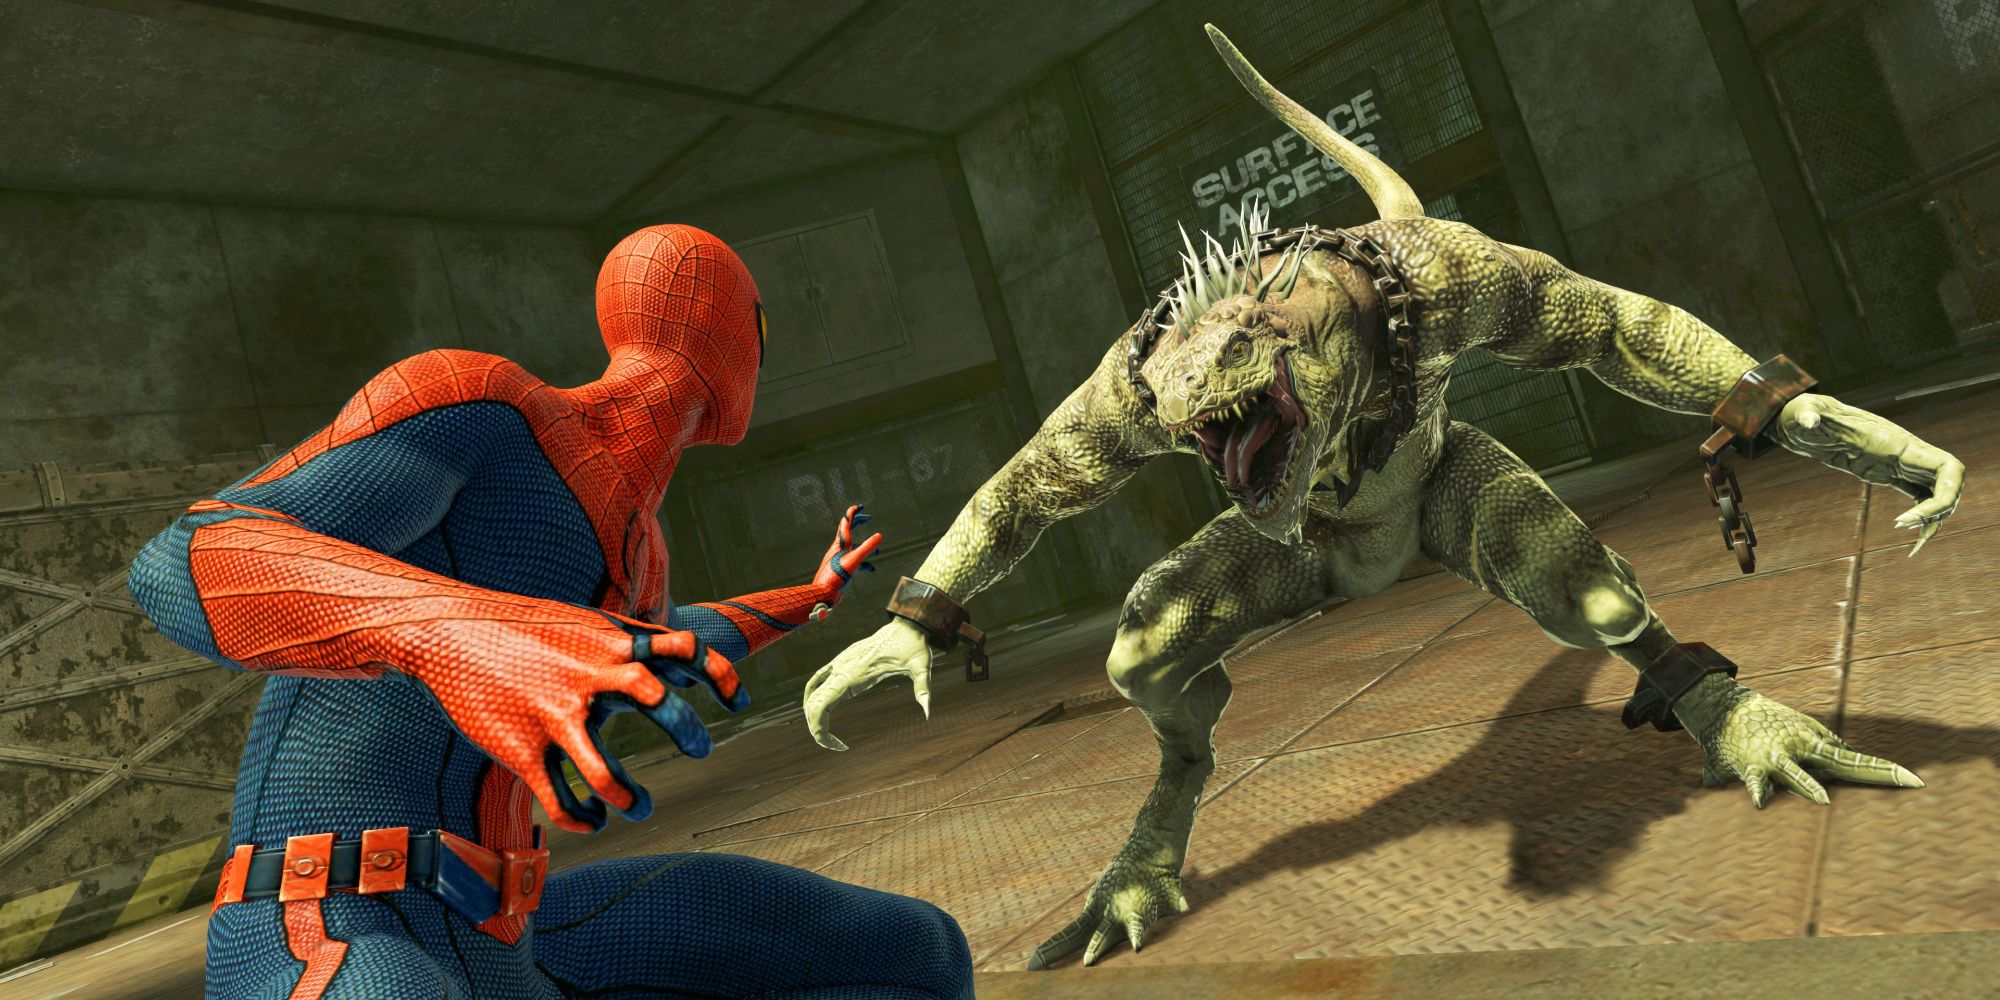 Spider Man fighting the Iguana in The Amazing Spider Man video game